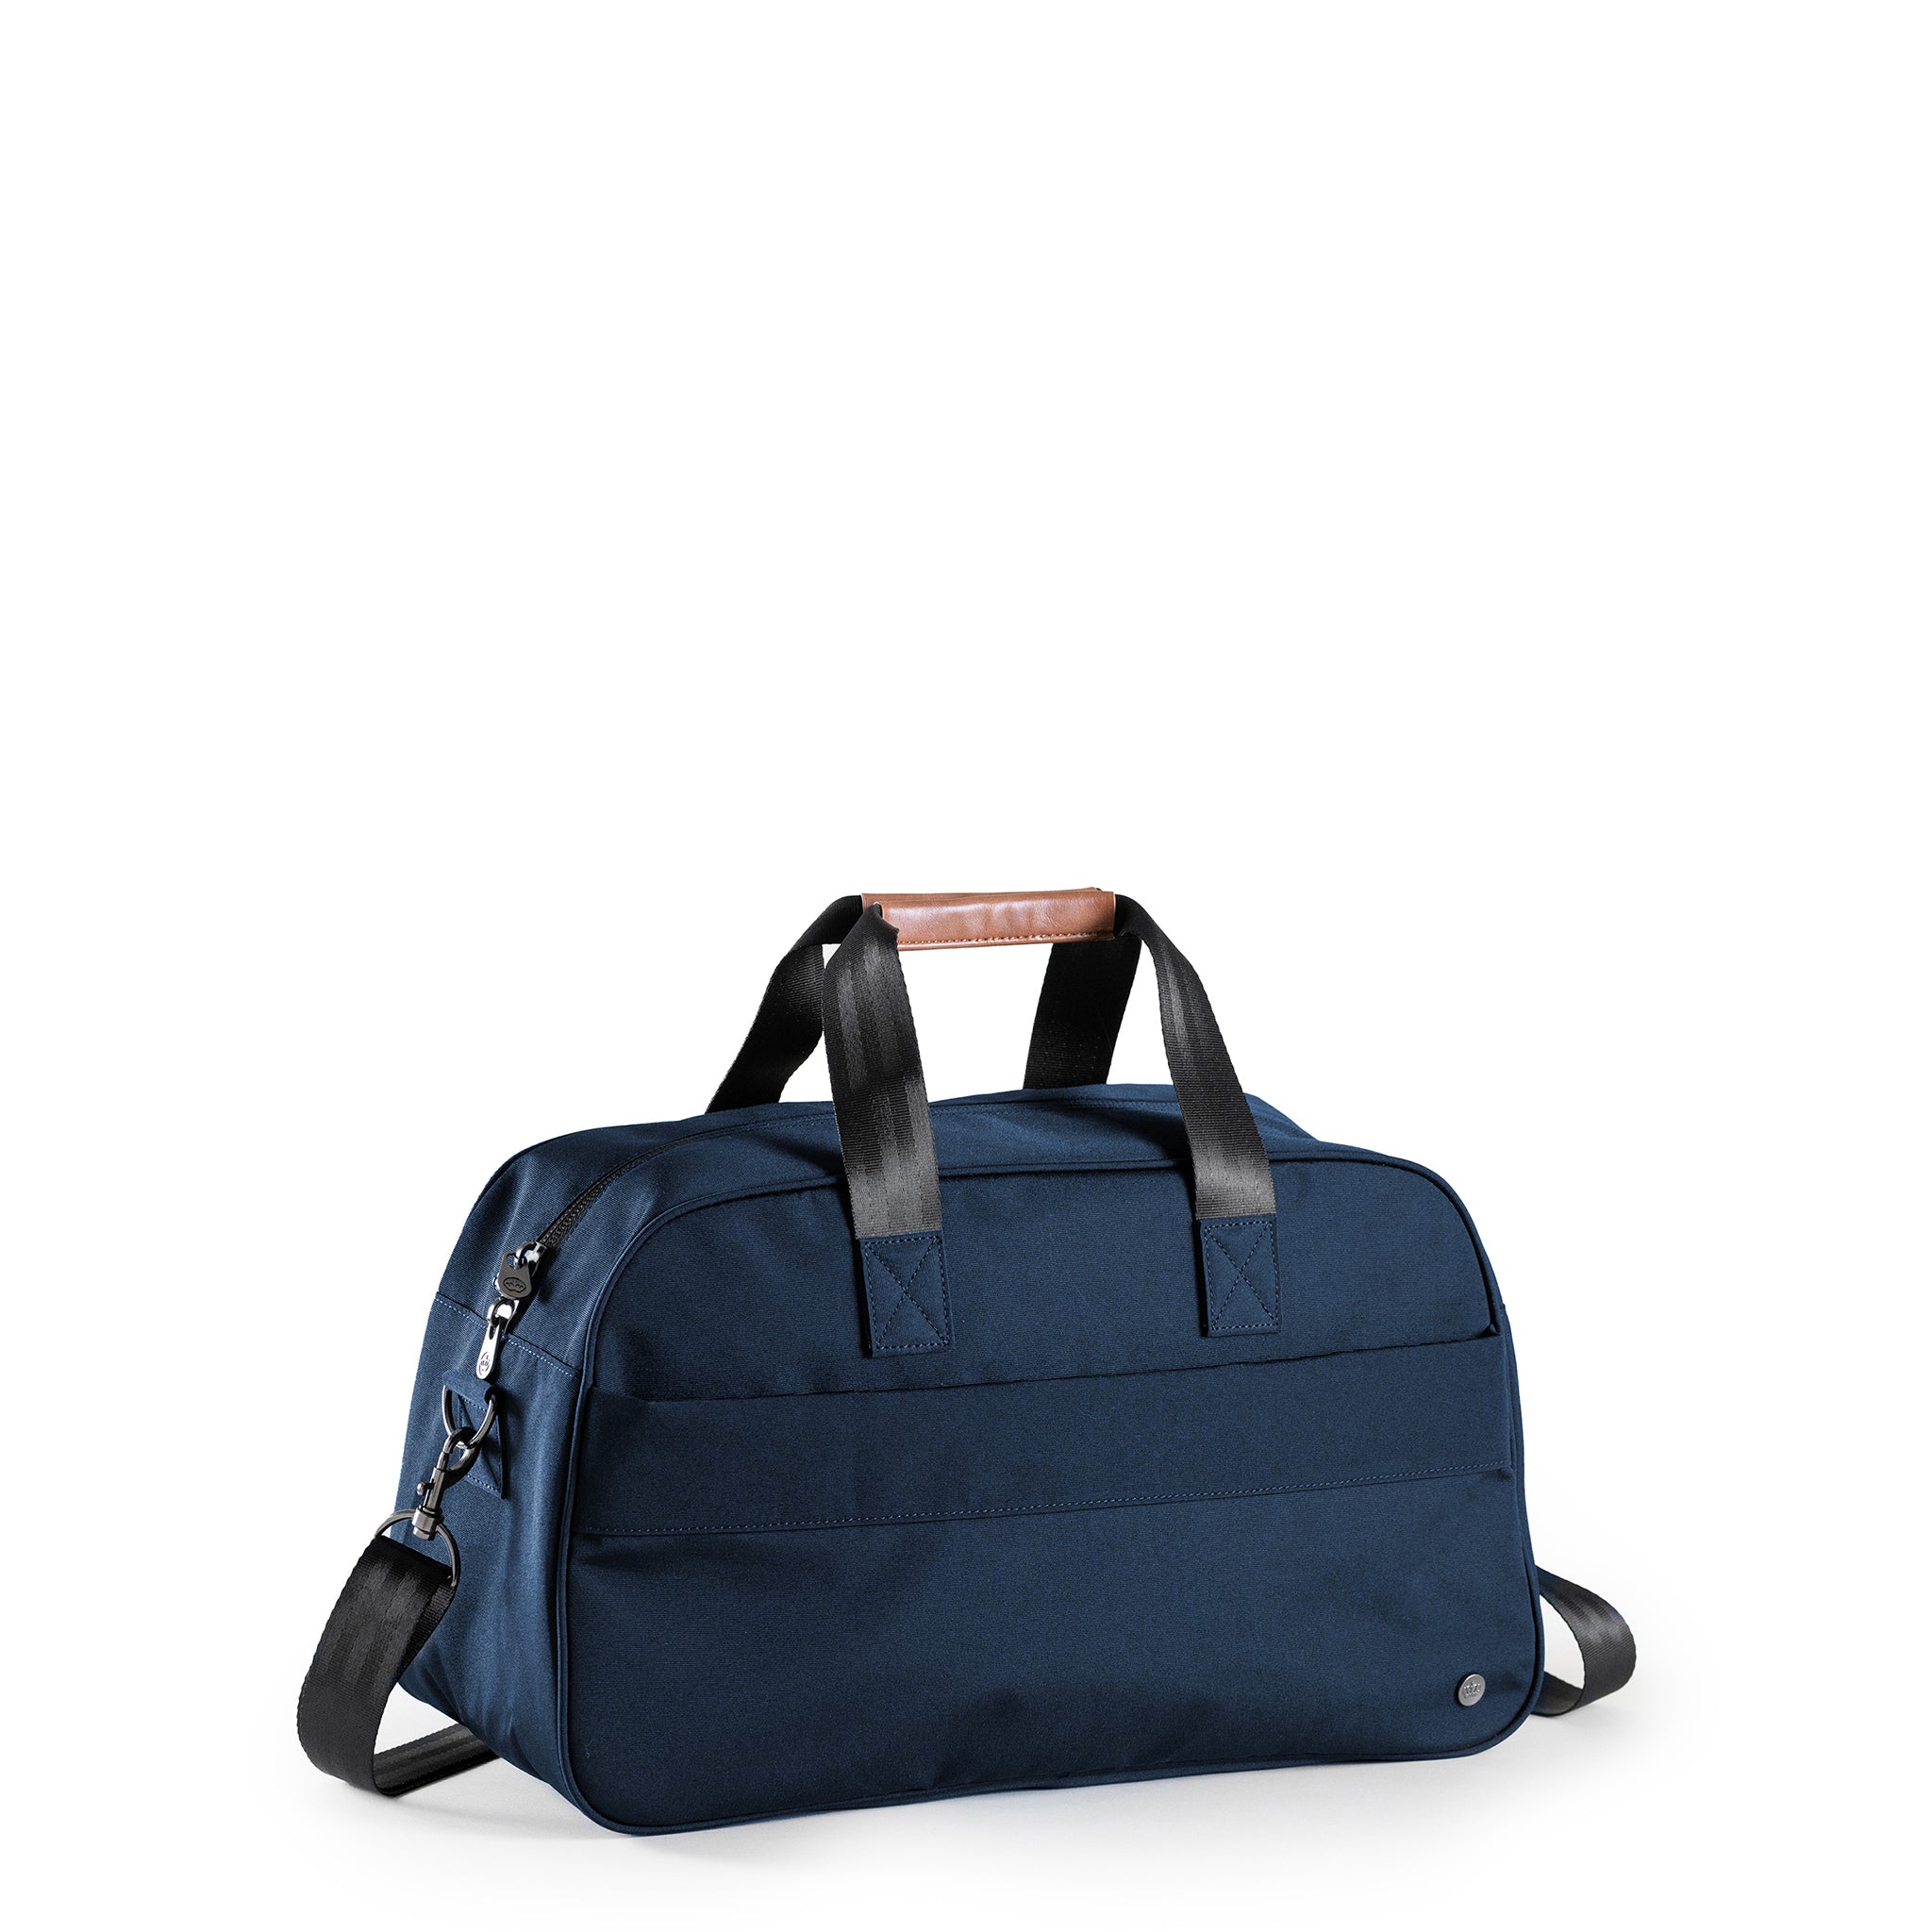 PKG Westmount 26L Recycled Duffle Bag by PKG Carry Goods